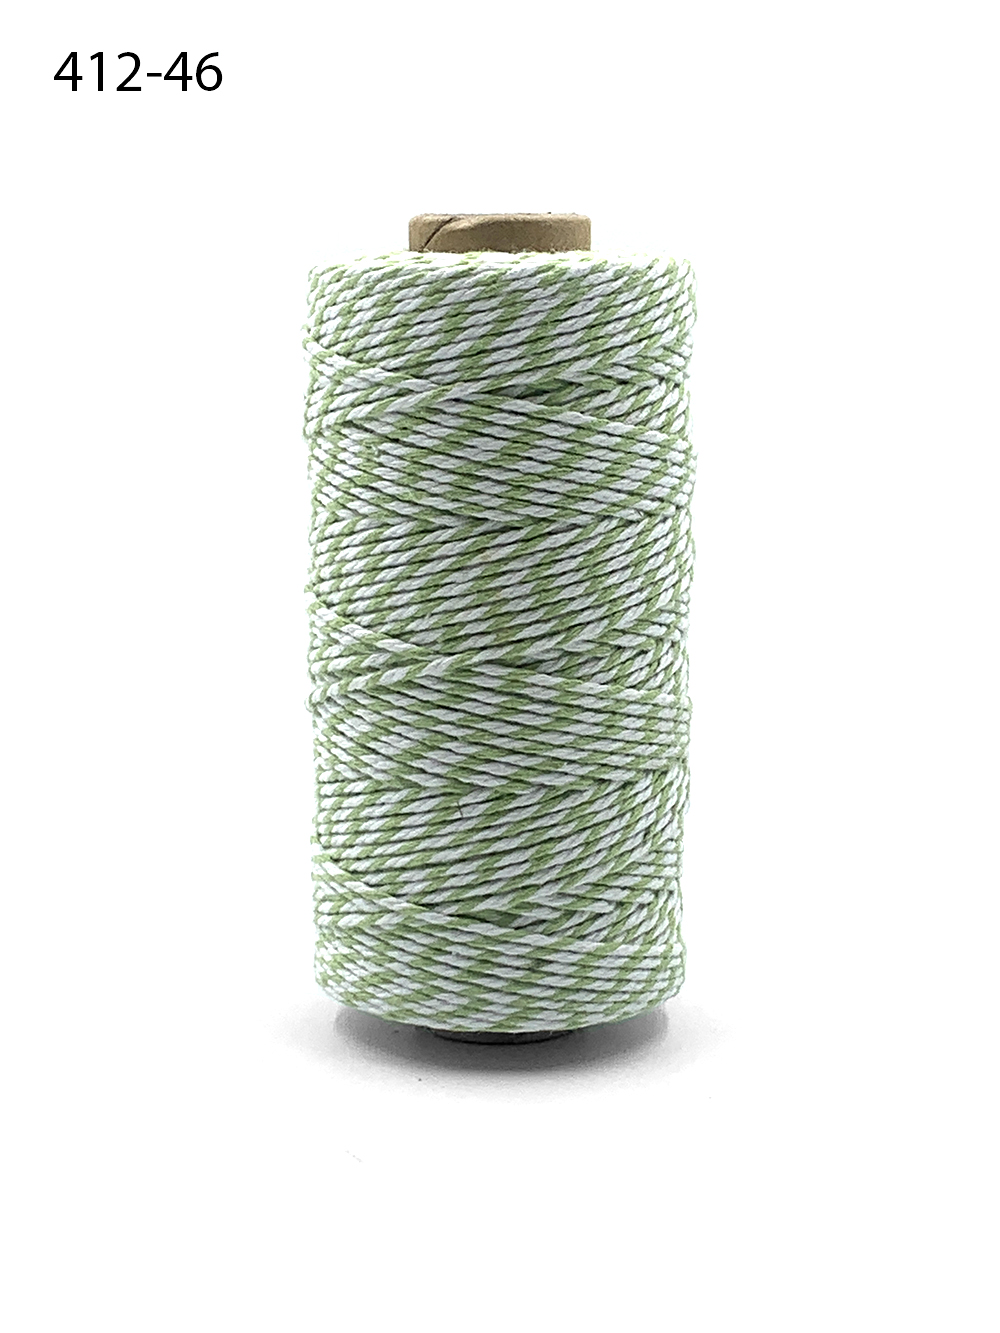 Bakers Blue and White Catering Twine 2mm Arts Crafts Parcel String